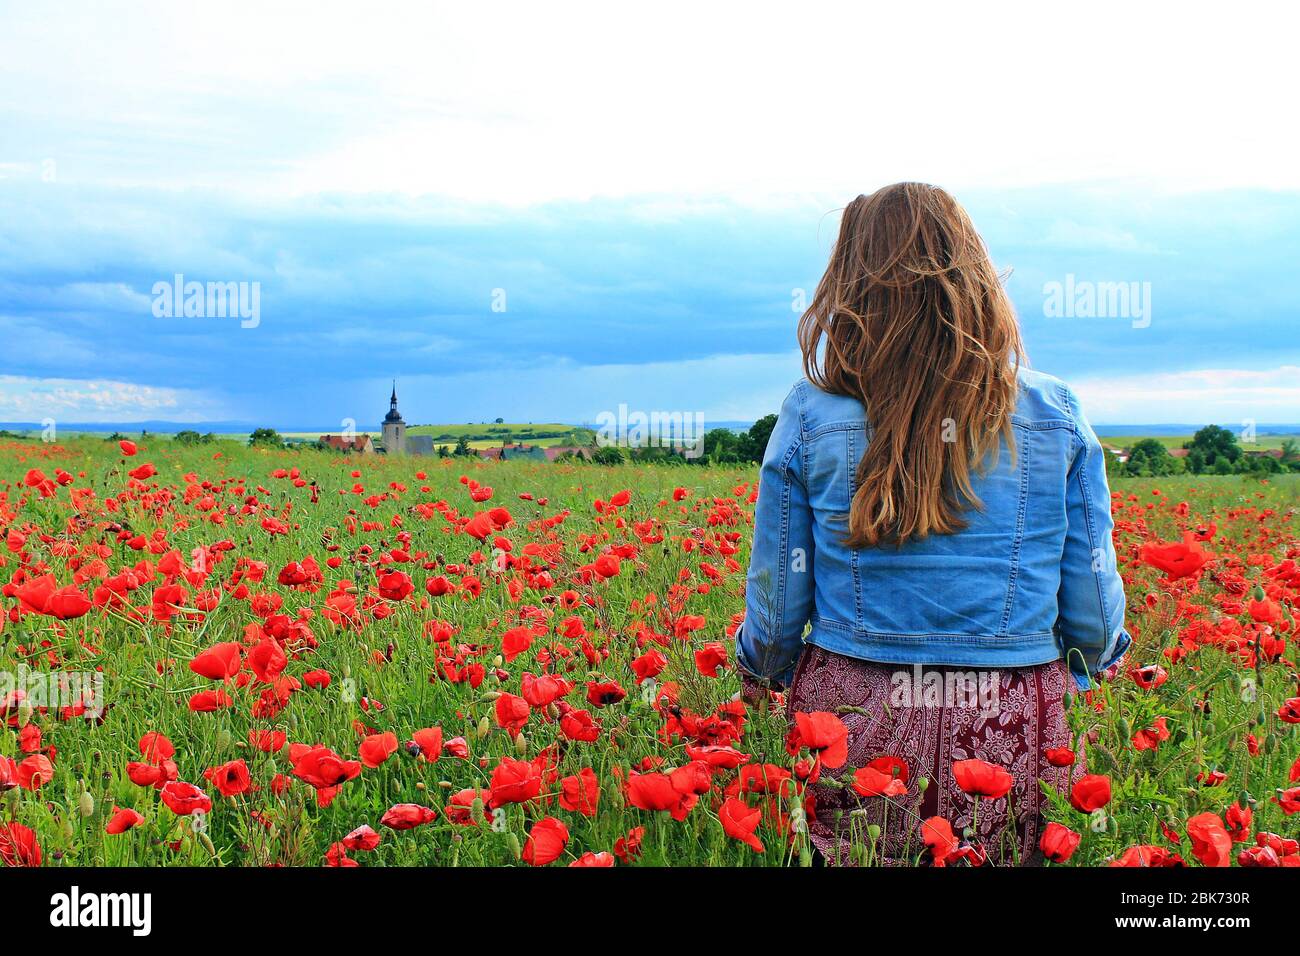 Girl standing in the field of poppies Stock Photo